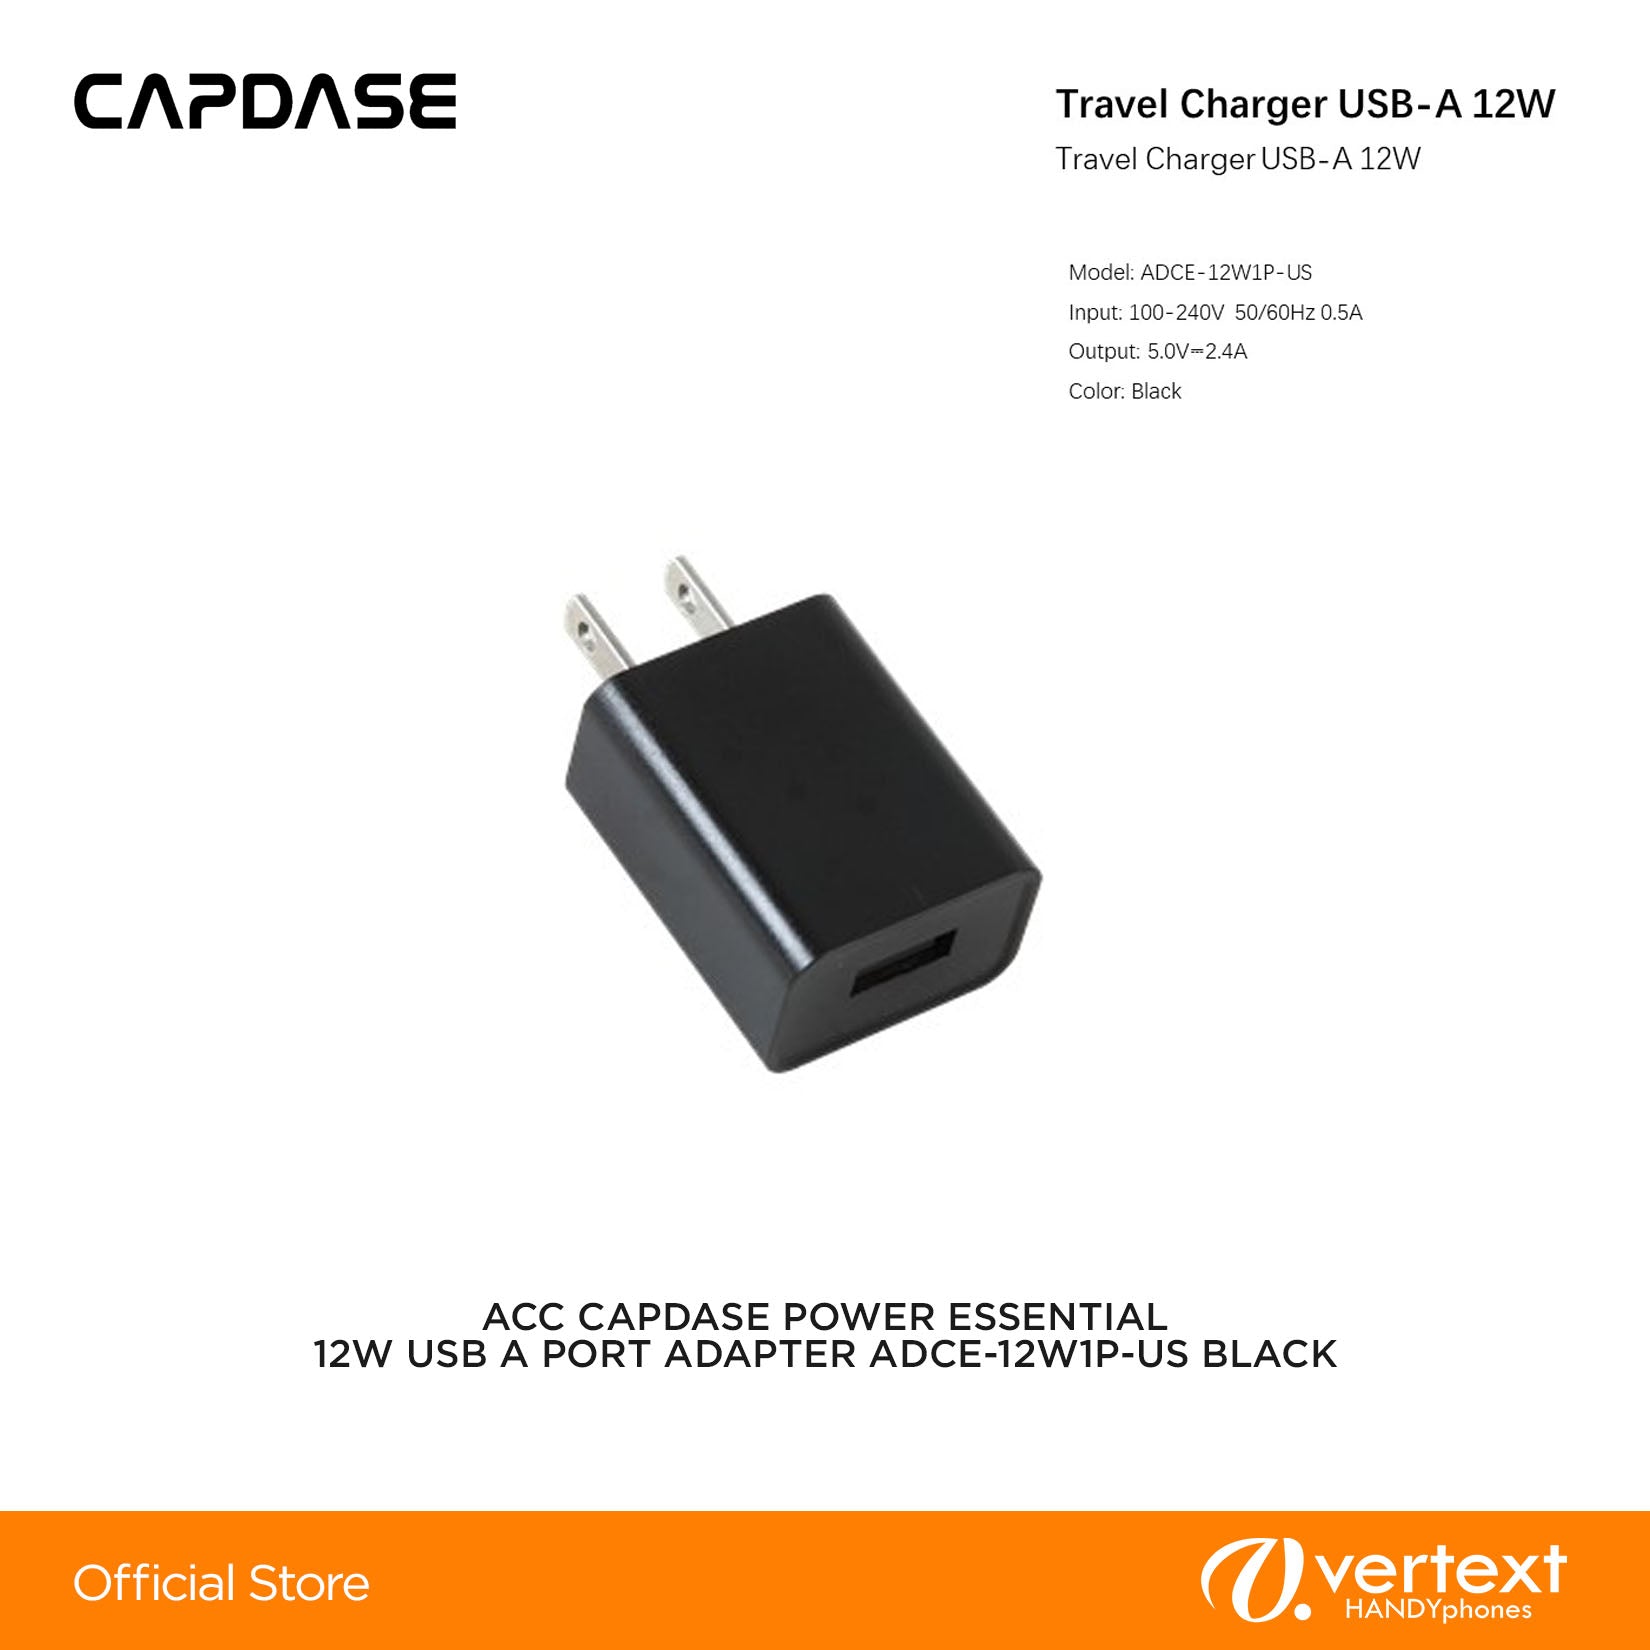 Capdase POWER ESSENTIAL 12W USB A PORT ADAPTER ADCE-12W1P-US